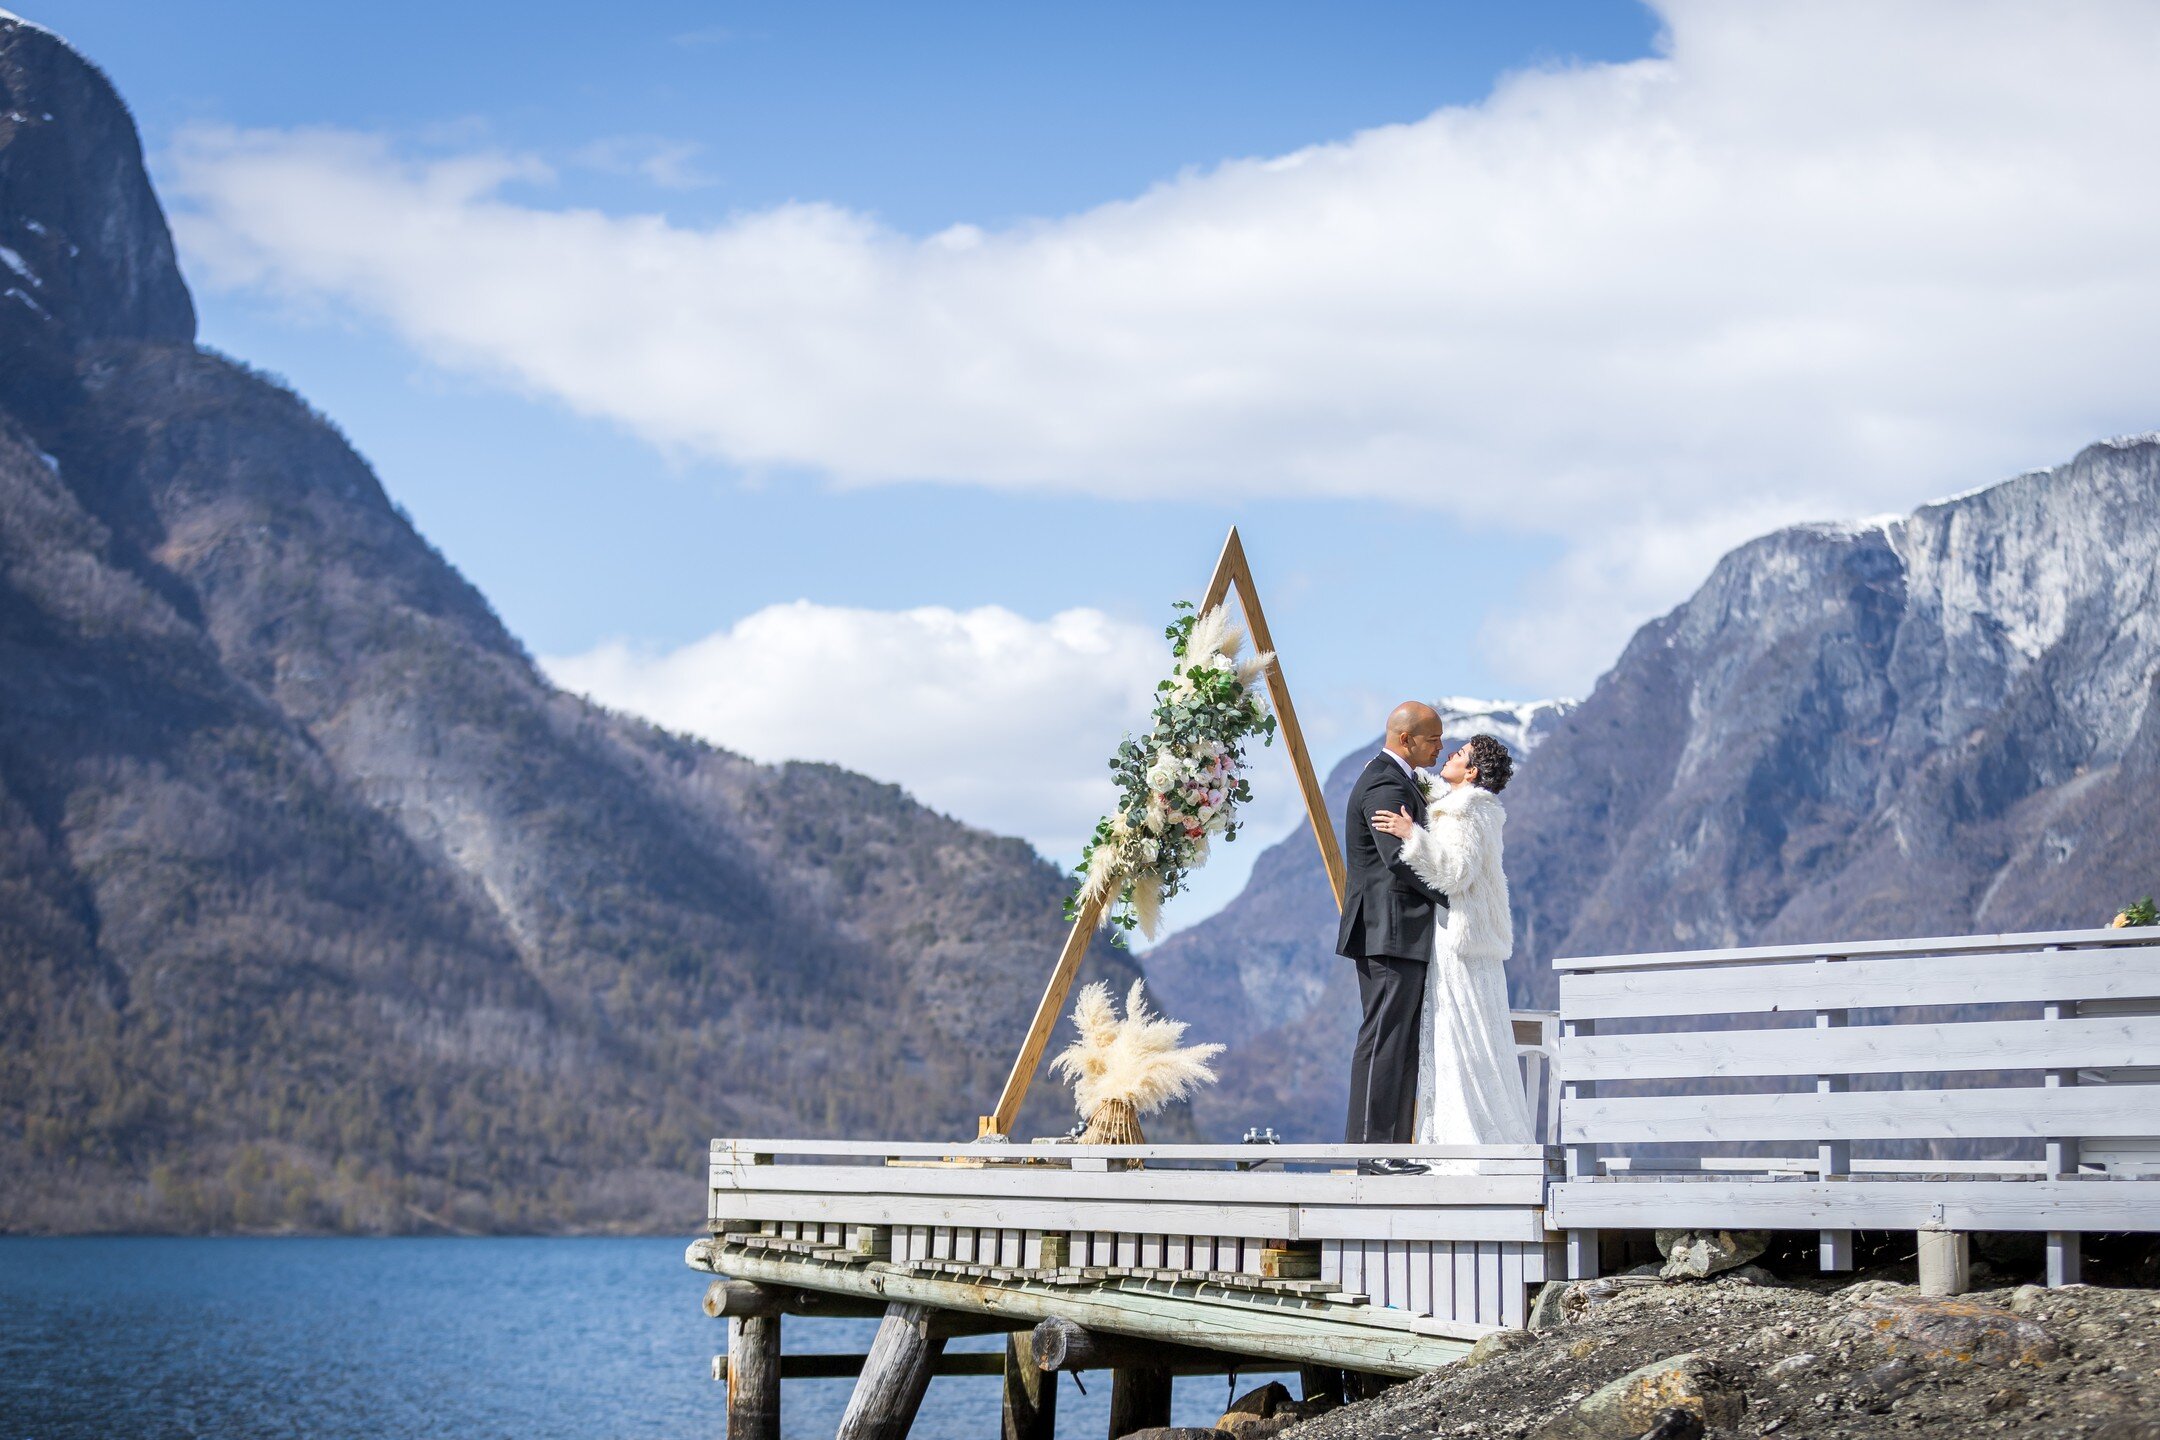 This lovely couple came from the US to get married in the fjords in May 2023. We shared a lot of cool stories driving around the mountains together during their SUV photoshoot adventure. Happy memories...

@get_married_in_norway 

#fjordwedding #fjor